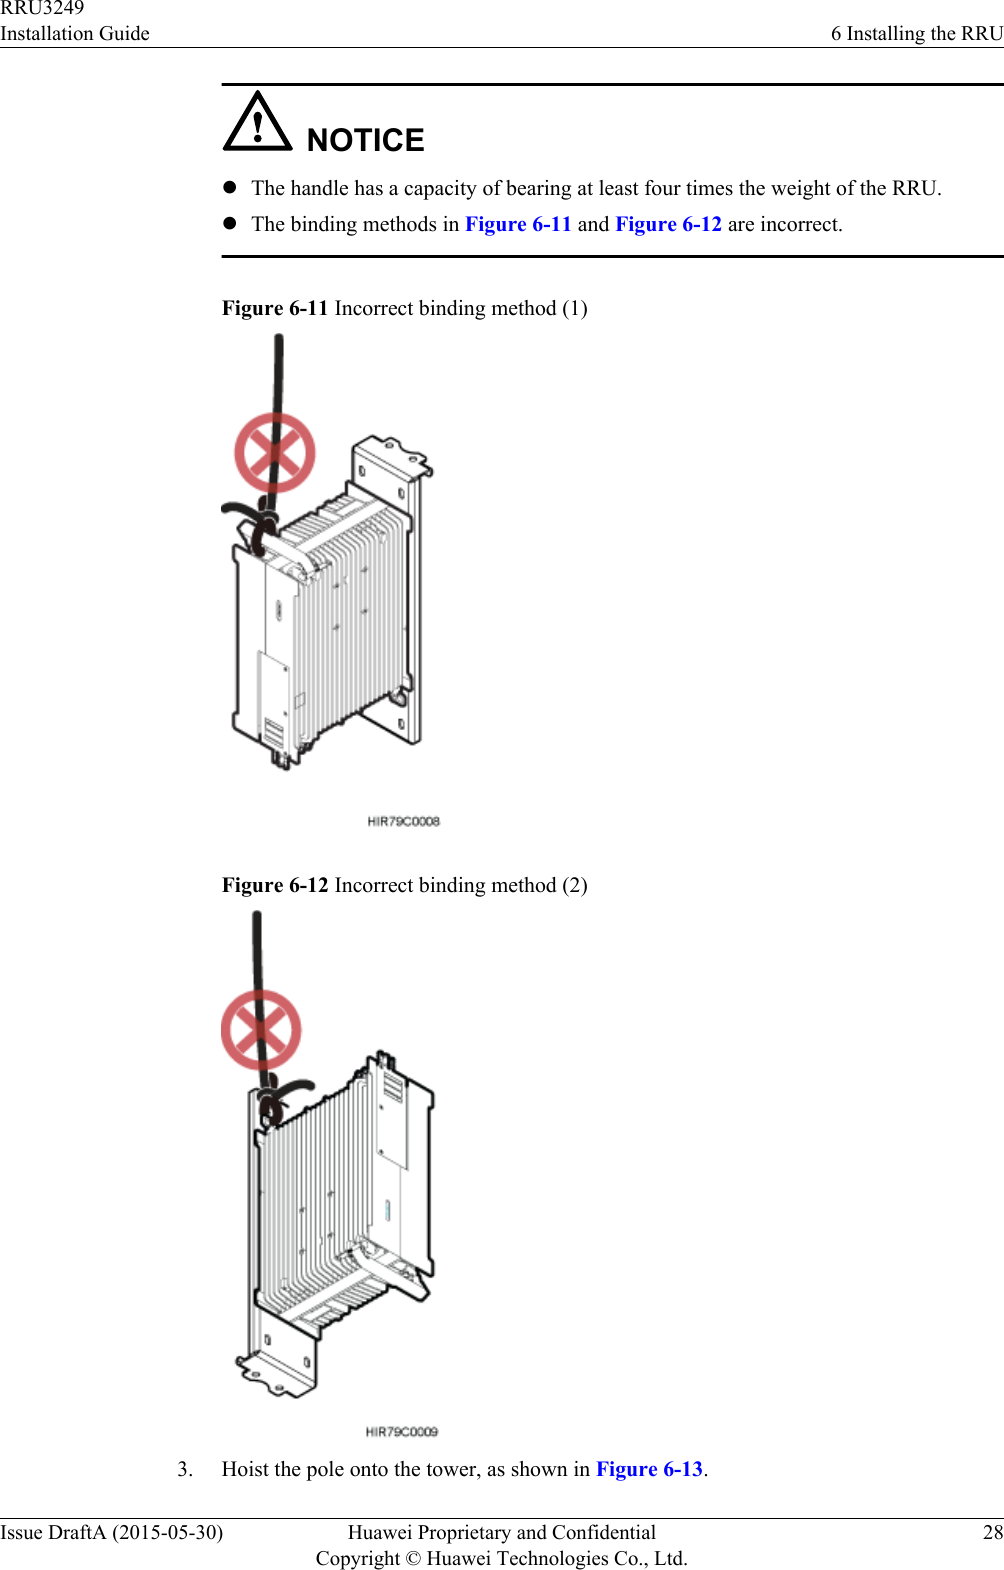 NOTICElThe handle has a capacity of bearing at least four times the weight of the RRU.lThe binding methods in Figure 6-11 and Figure 6-12 are incorrect.Figure 6-11 Incorrect binding method (1)Figure 6-12 Incorrect binding method (2)3. Hoist the pole onto the tower, as shown in Figure 6-13.RRU3249Installation Guide 6 Installing the RRUIssue DraftA (2015-05-30) Huawei Proprietary and ConfidentialCopyright © Huawei Technologies Co., Ltd.28